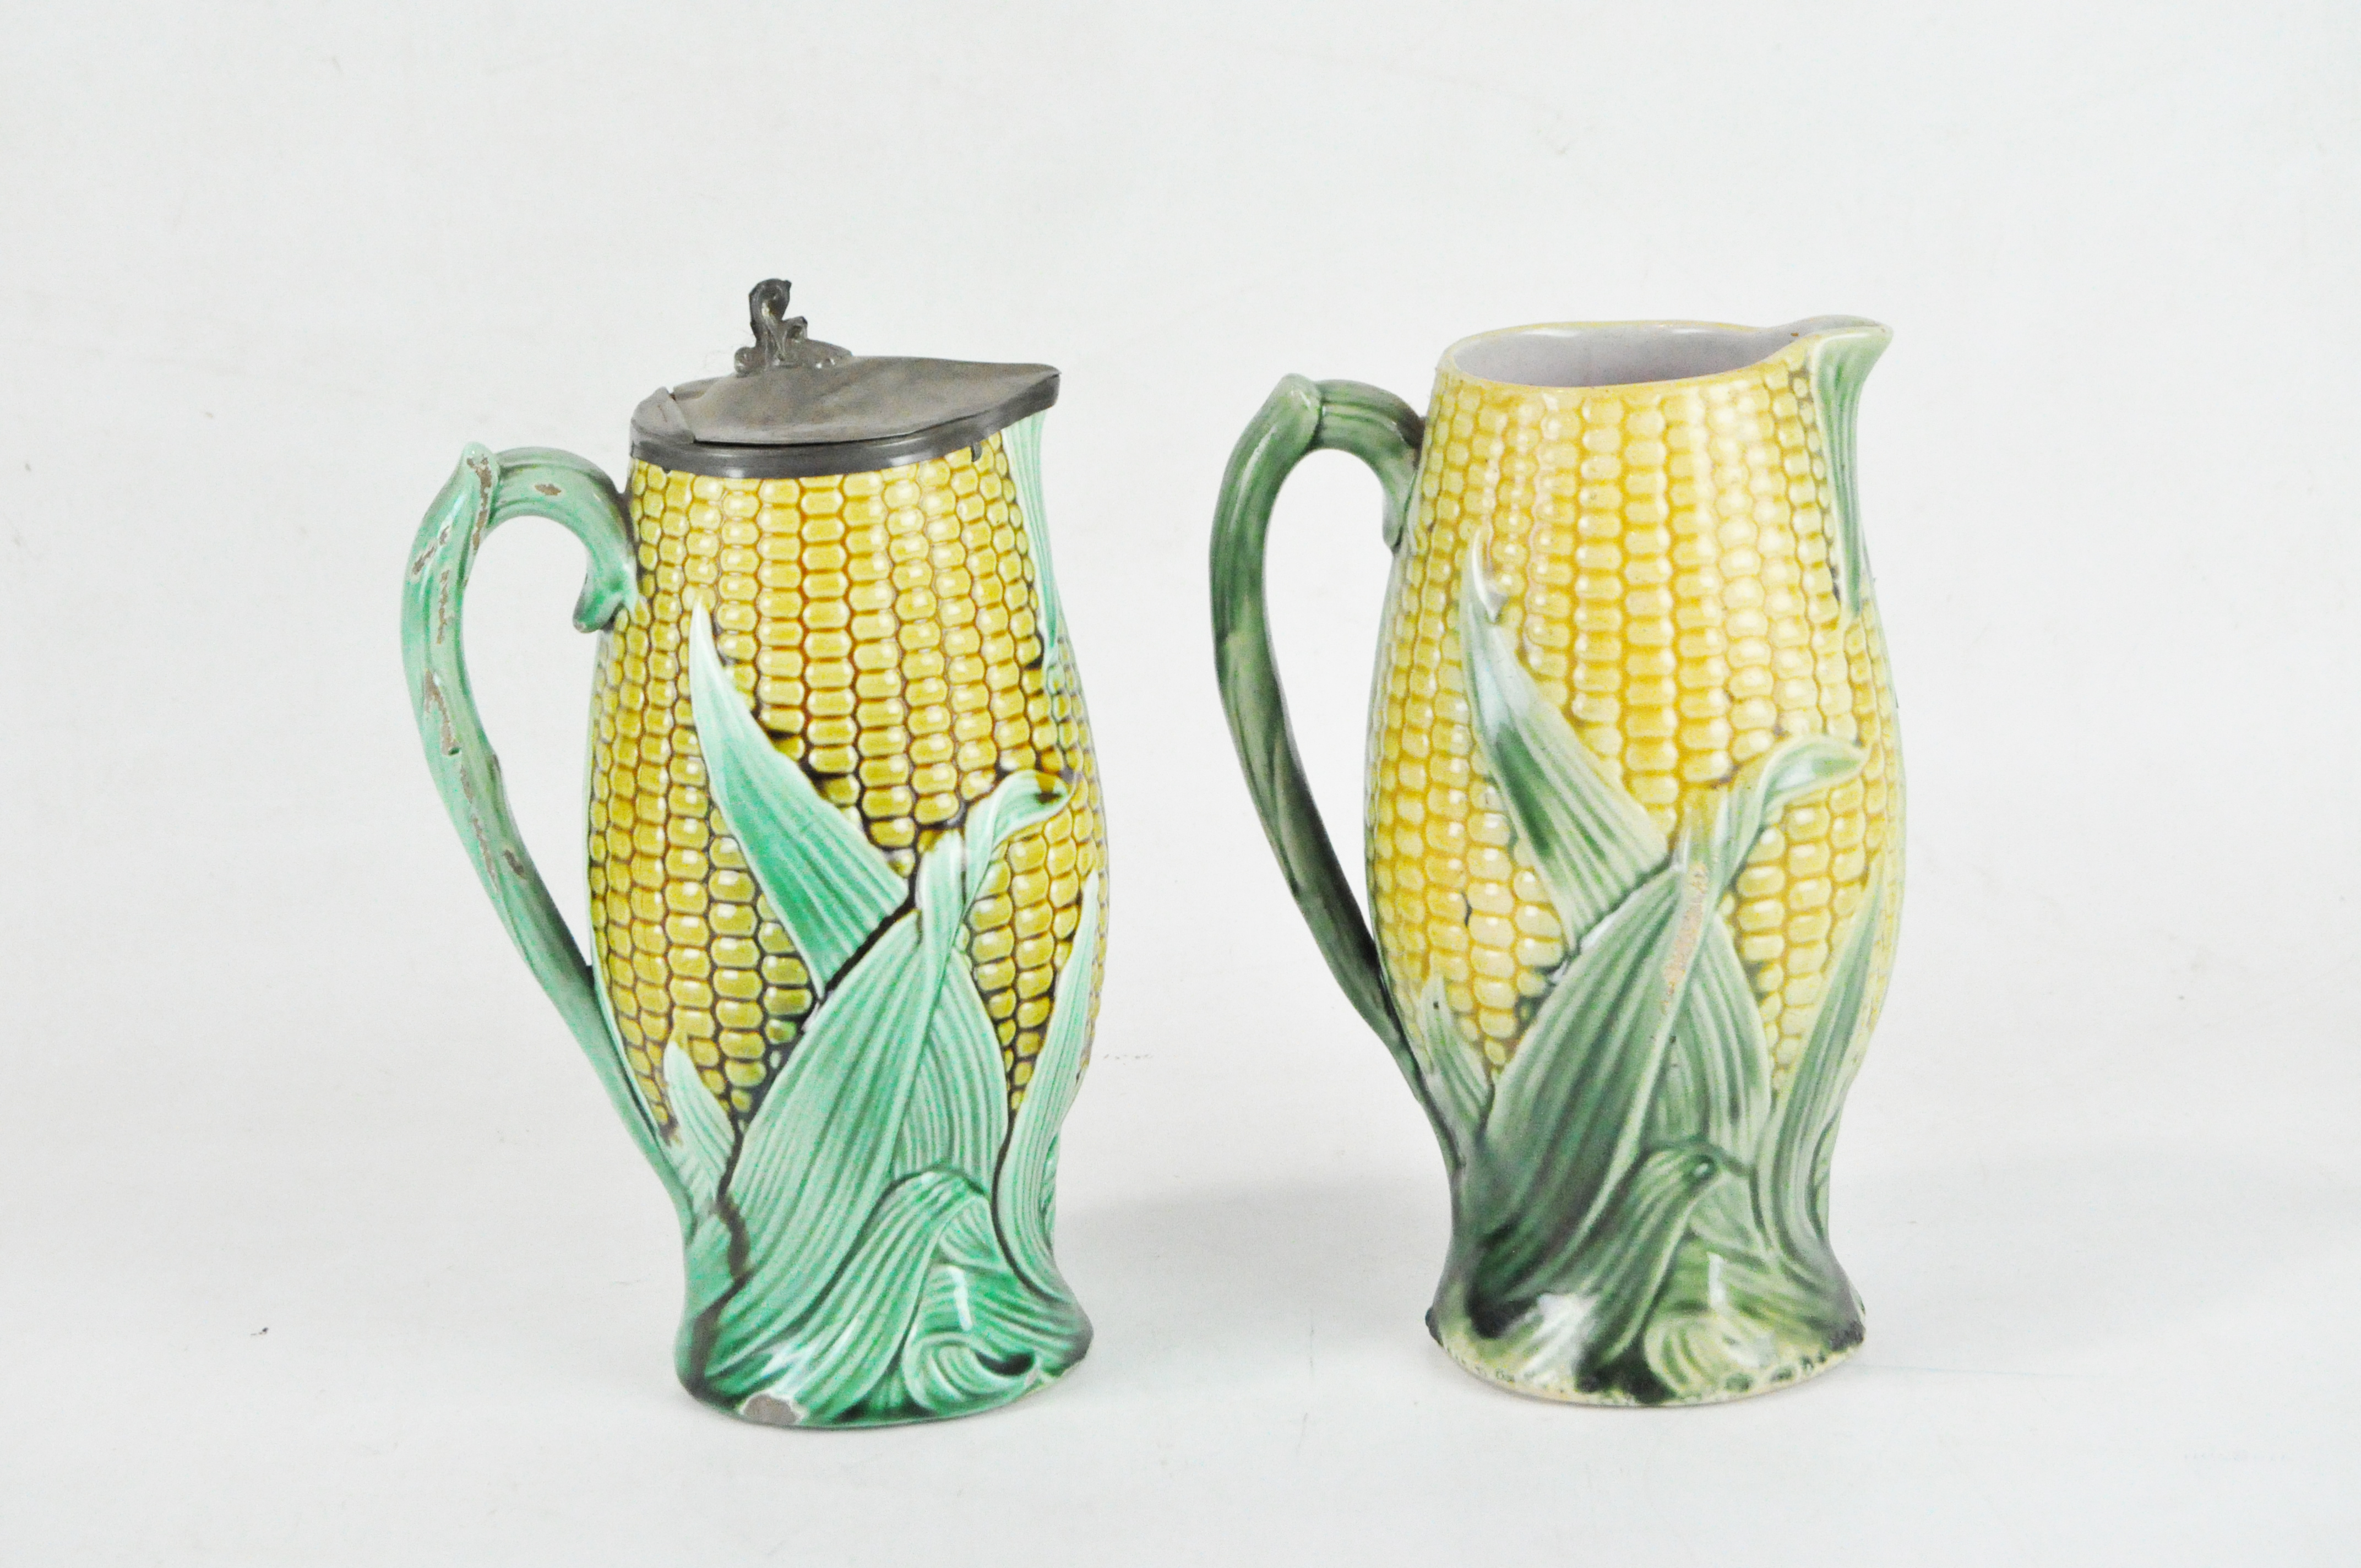 Two English majolica vases in the shape of corn cobs, - Image 2 of 3